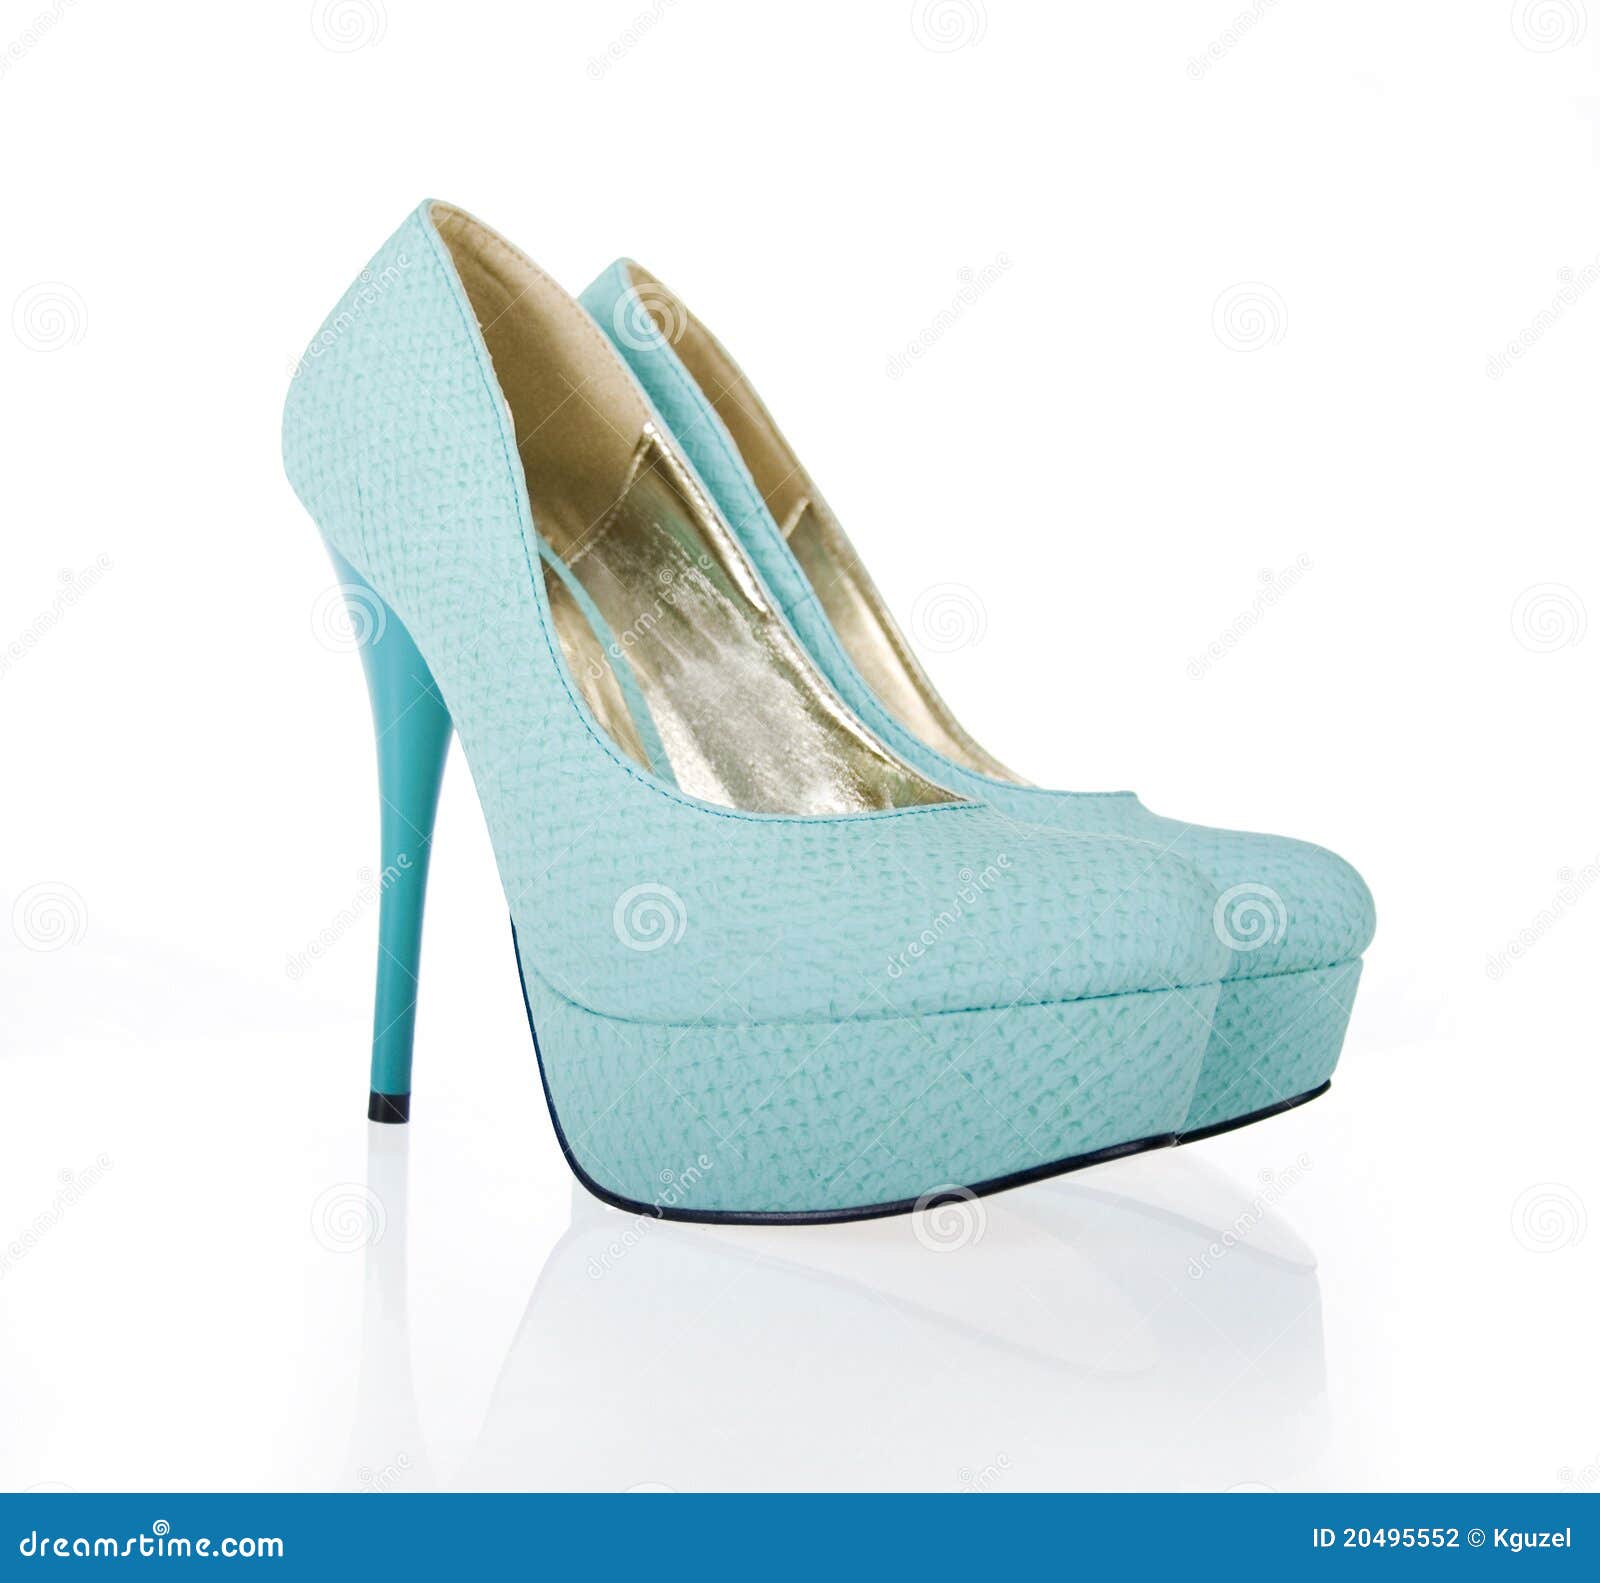 funky wedding shoes turquoise with studded heels